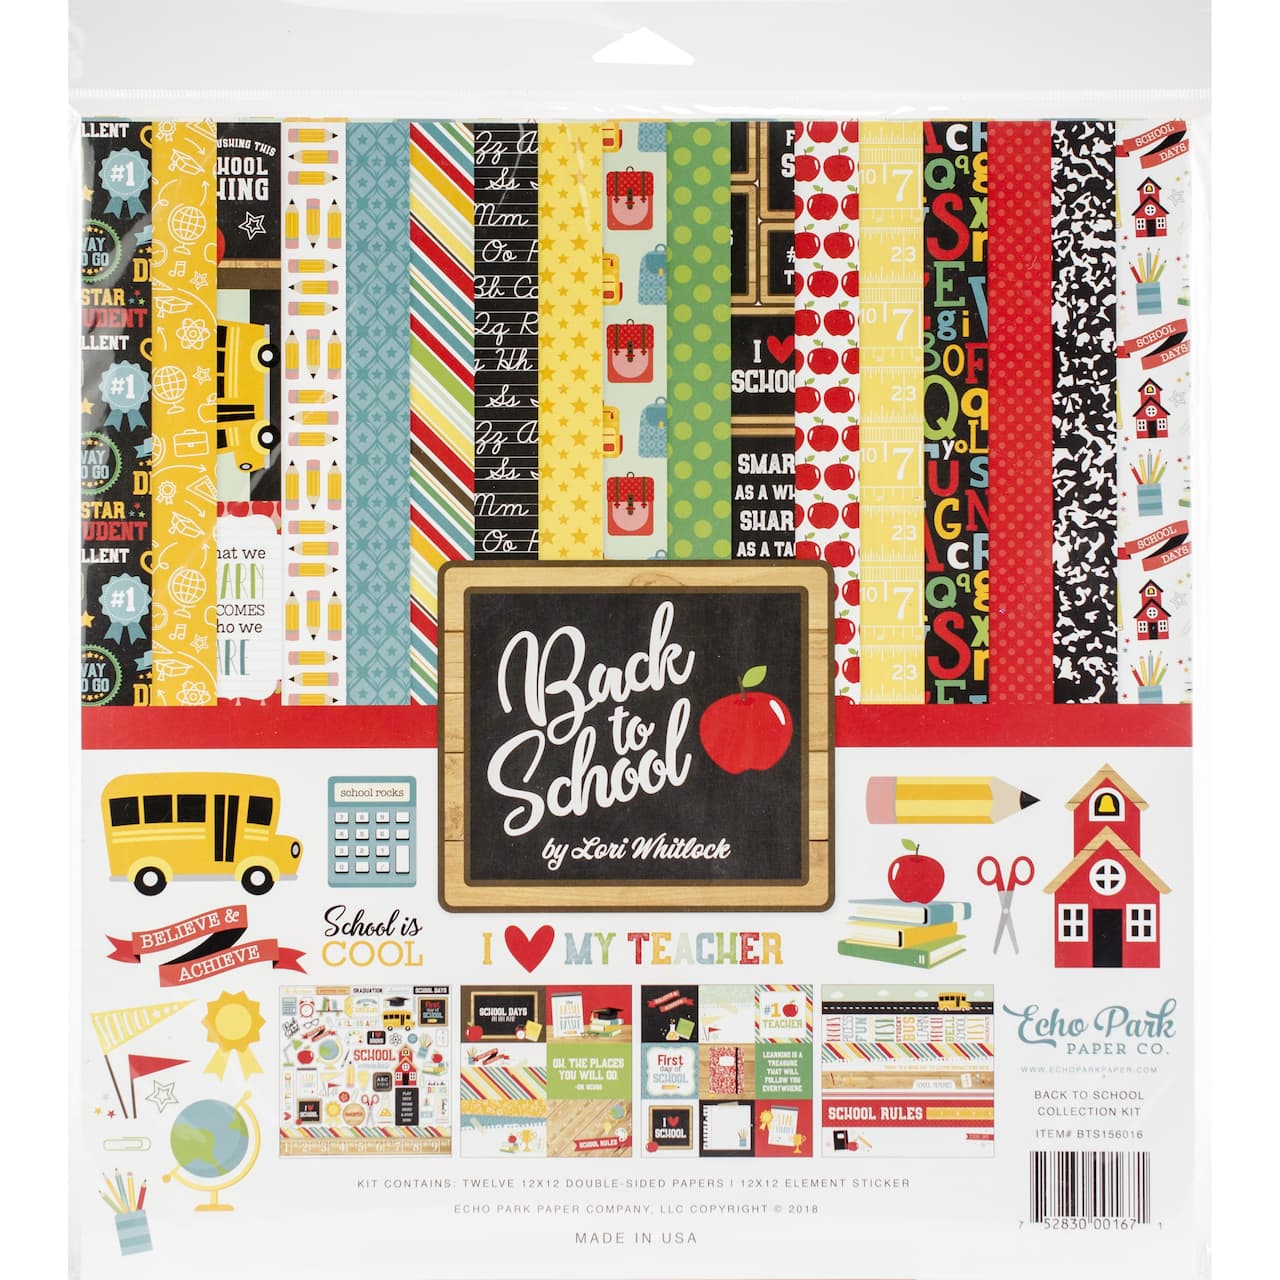 Echo Park™ Paper Co. Back to School Collection Kit, 12 x 12